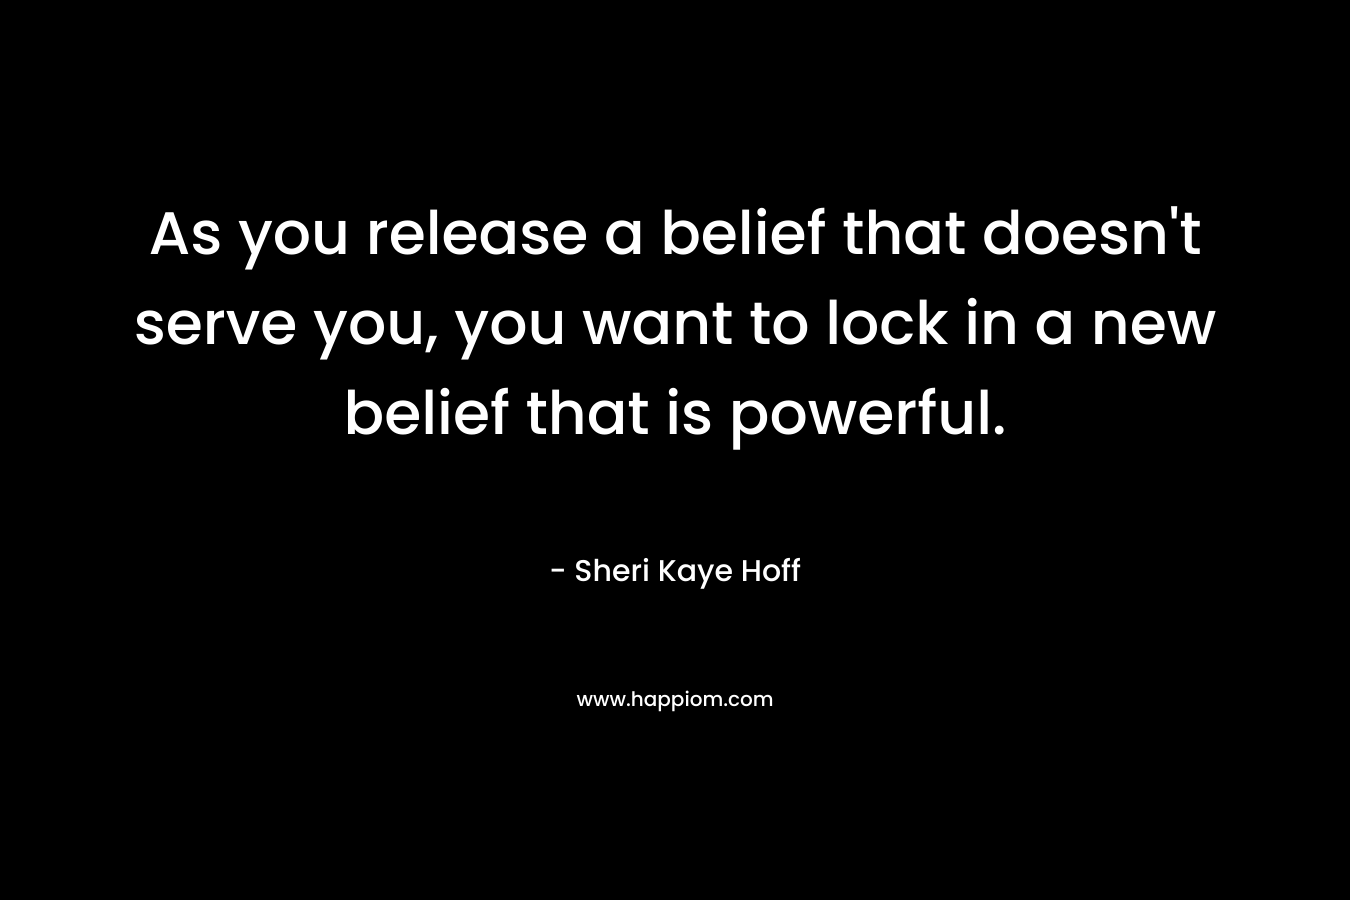 As you release a belief that doesn’t serve you, you want to lock in a new belief that is powerful. – Sheri Kaye Hoff